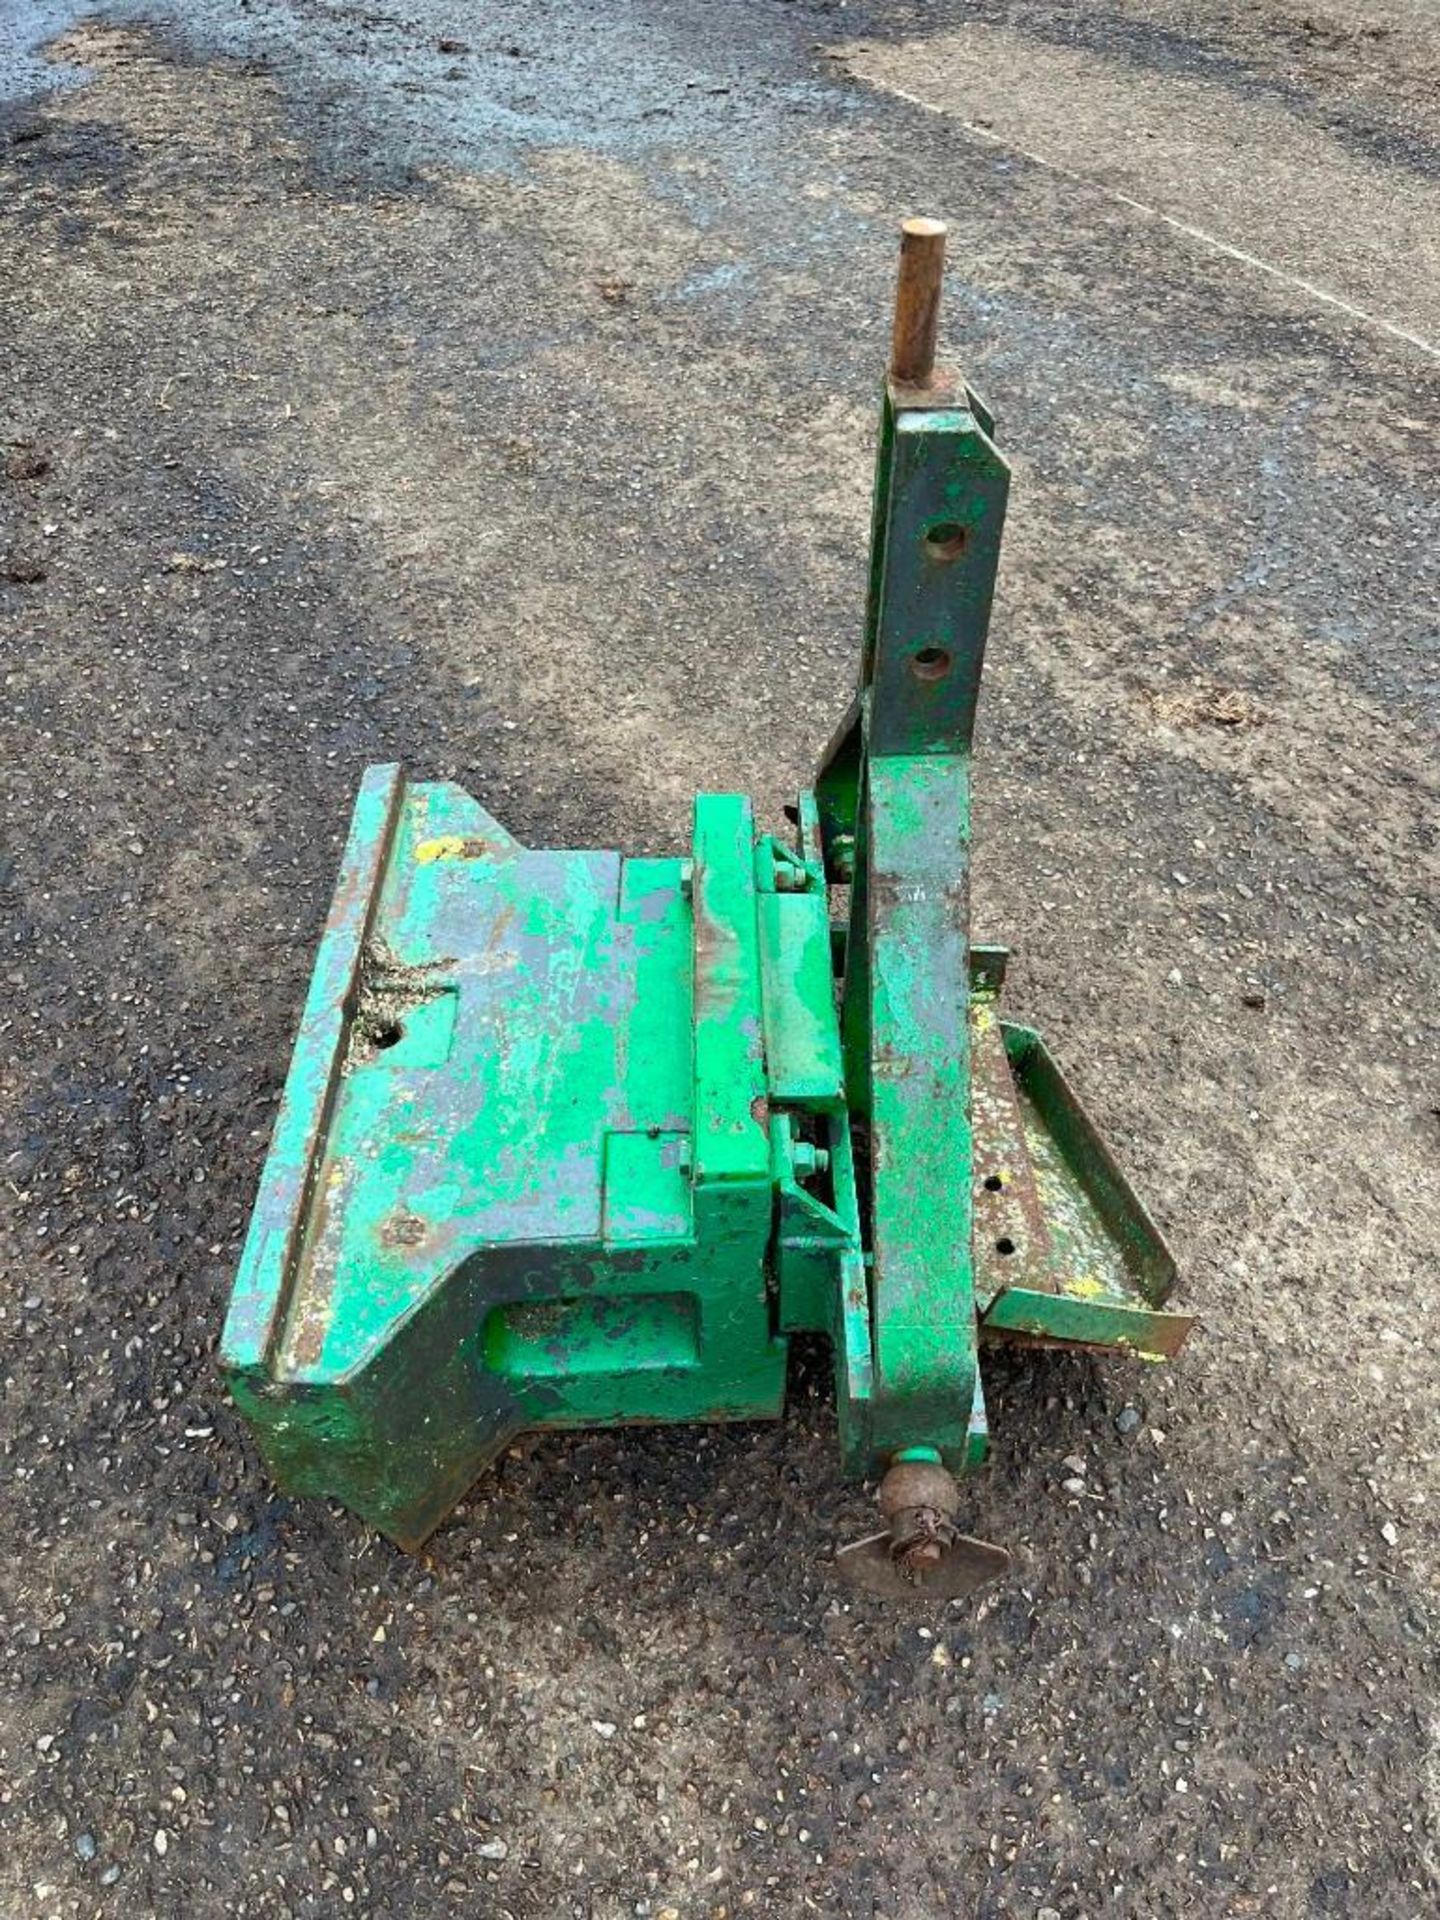 Renault 566Kg 3 Point Linkage Weight Block - Image 2 of 5